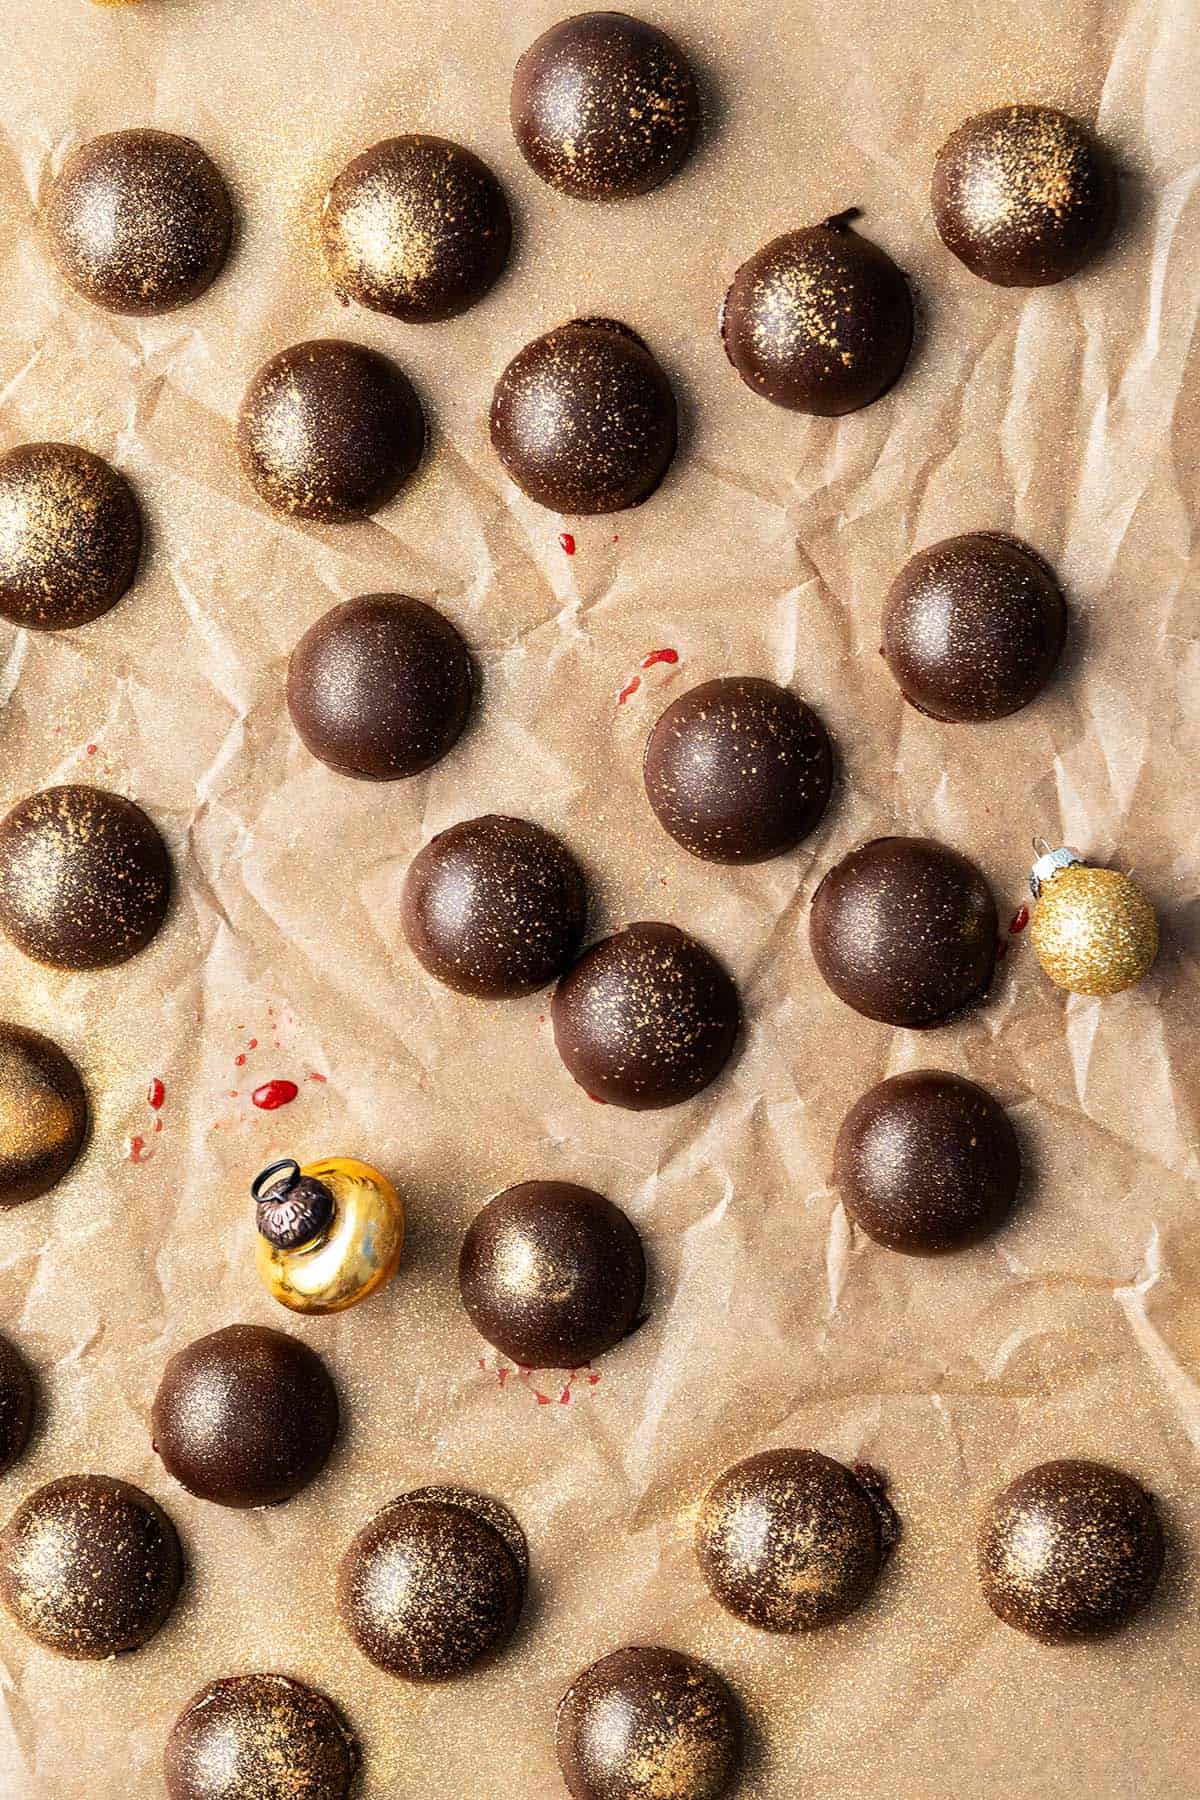 overhead view of homemade chocolate candies decorated with edible gold dust